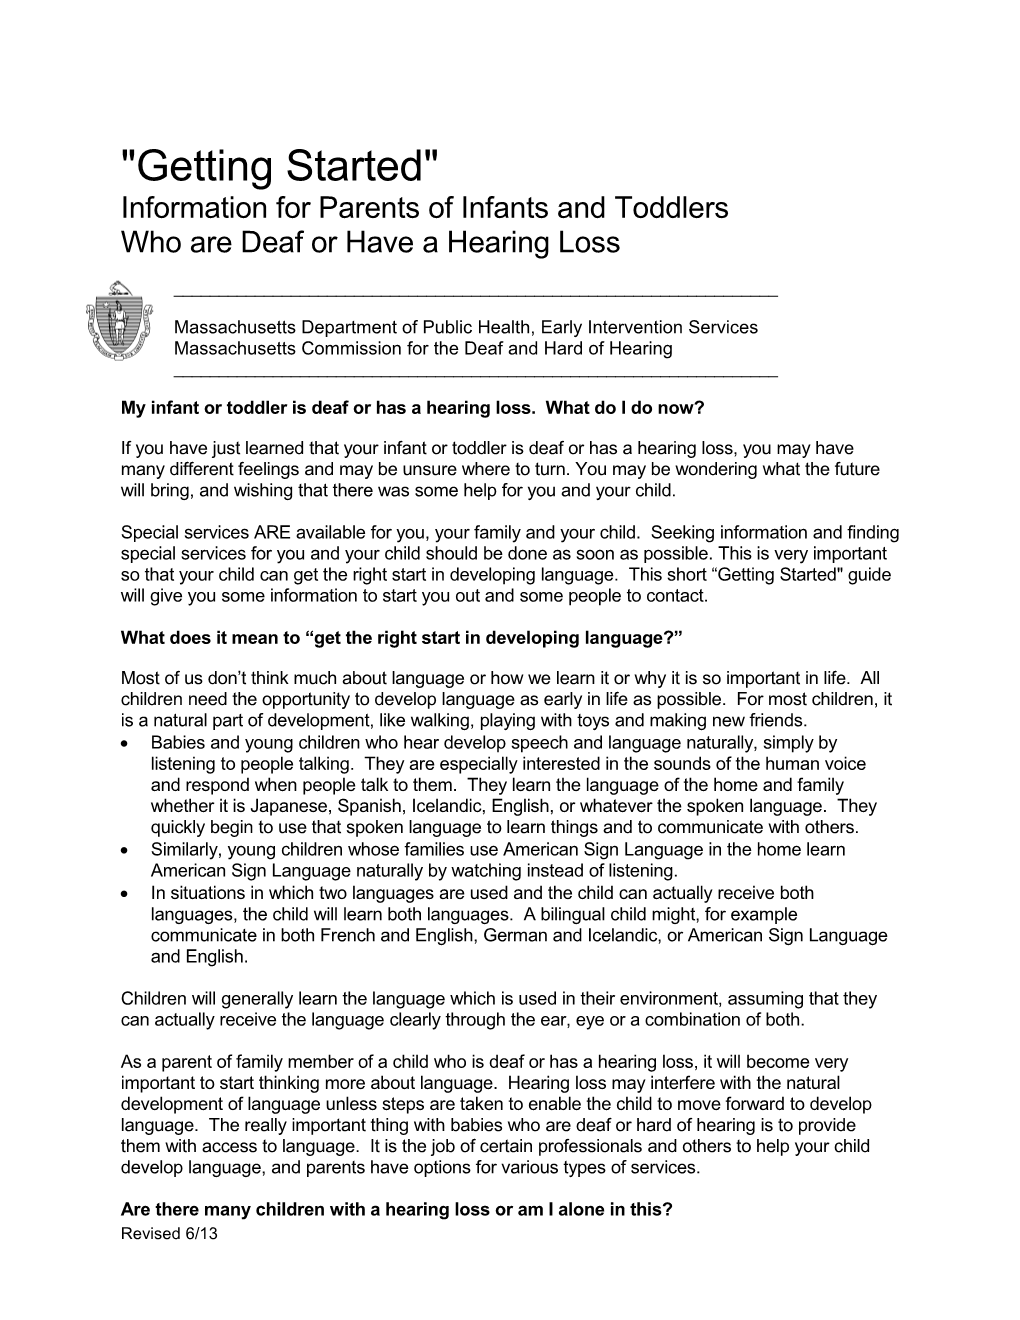 Information for Parents of Infants and Toddlers